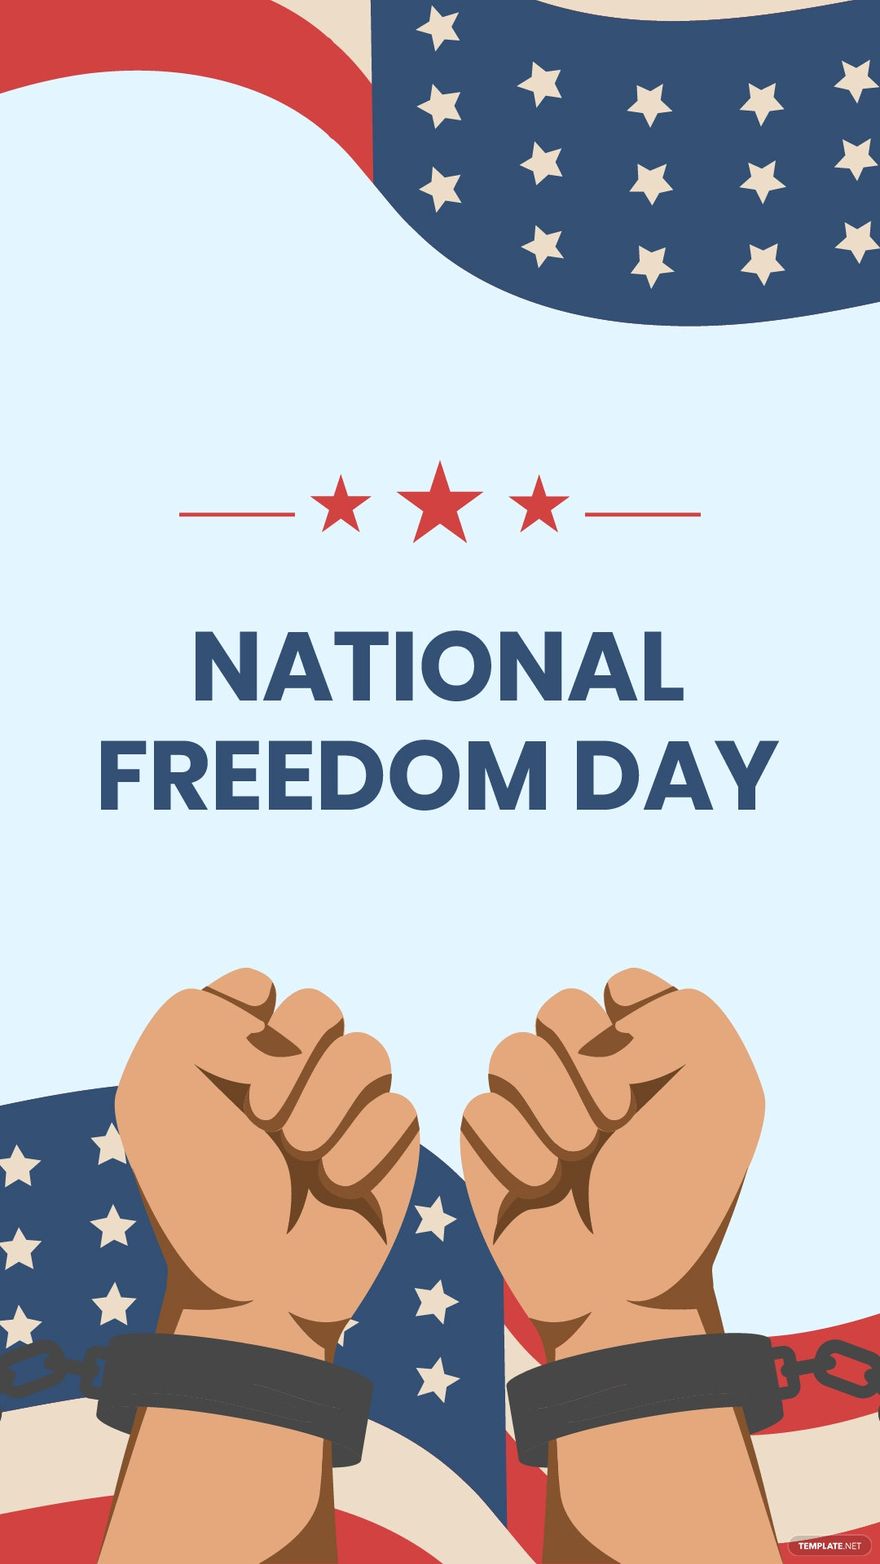 National Freedom Day iPhone Background in PDF, Illustrator, PSD, EPS, SVG, JPG, PNG